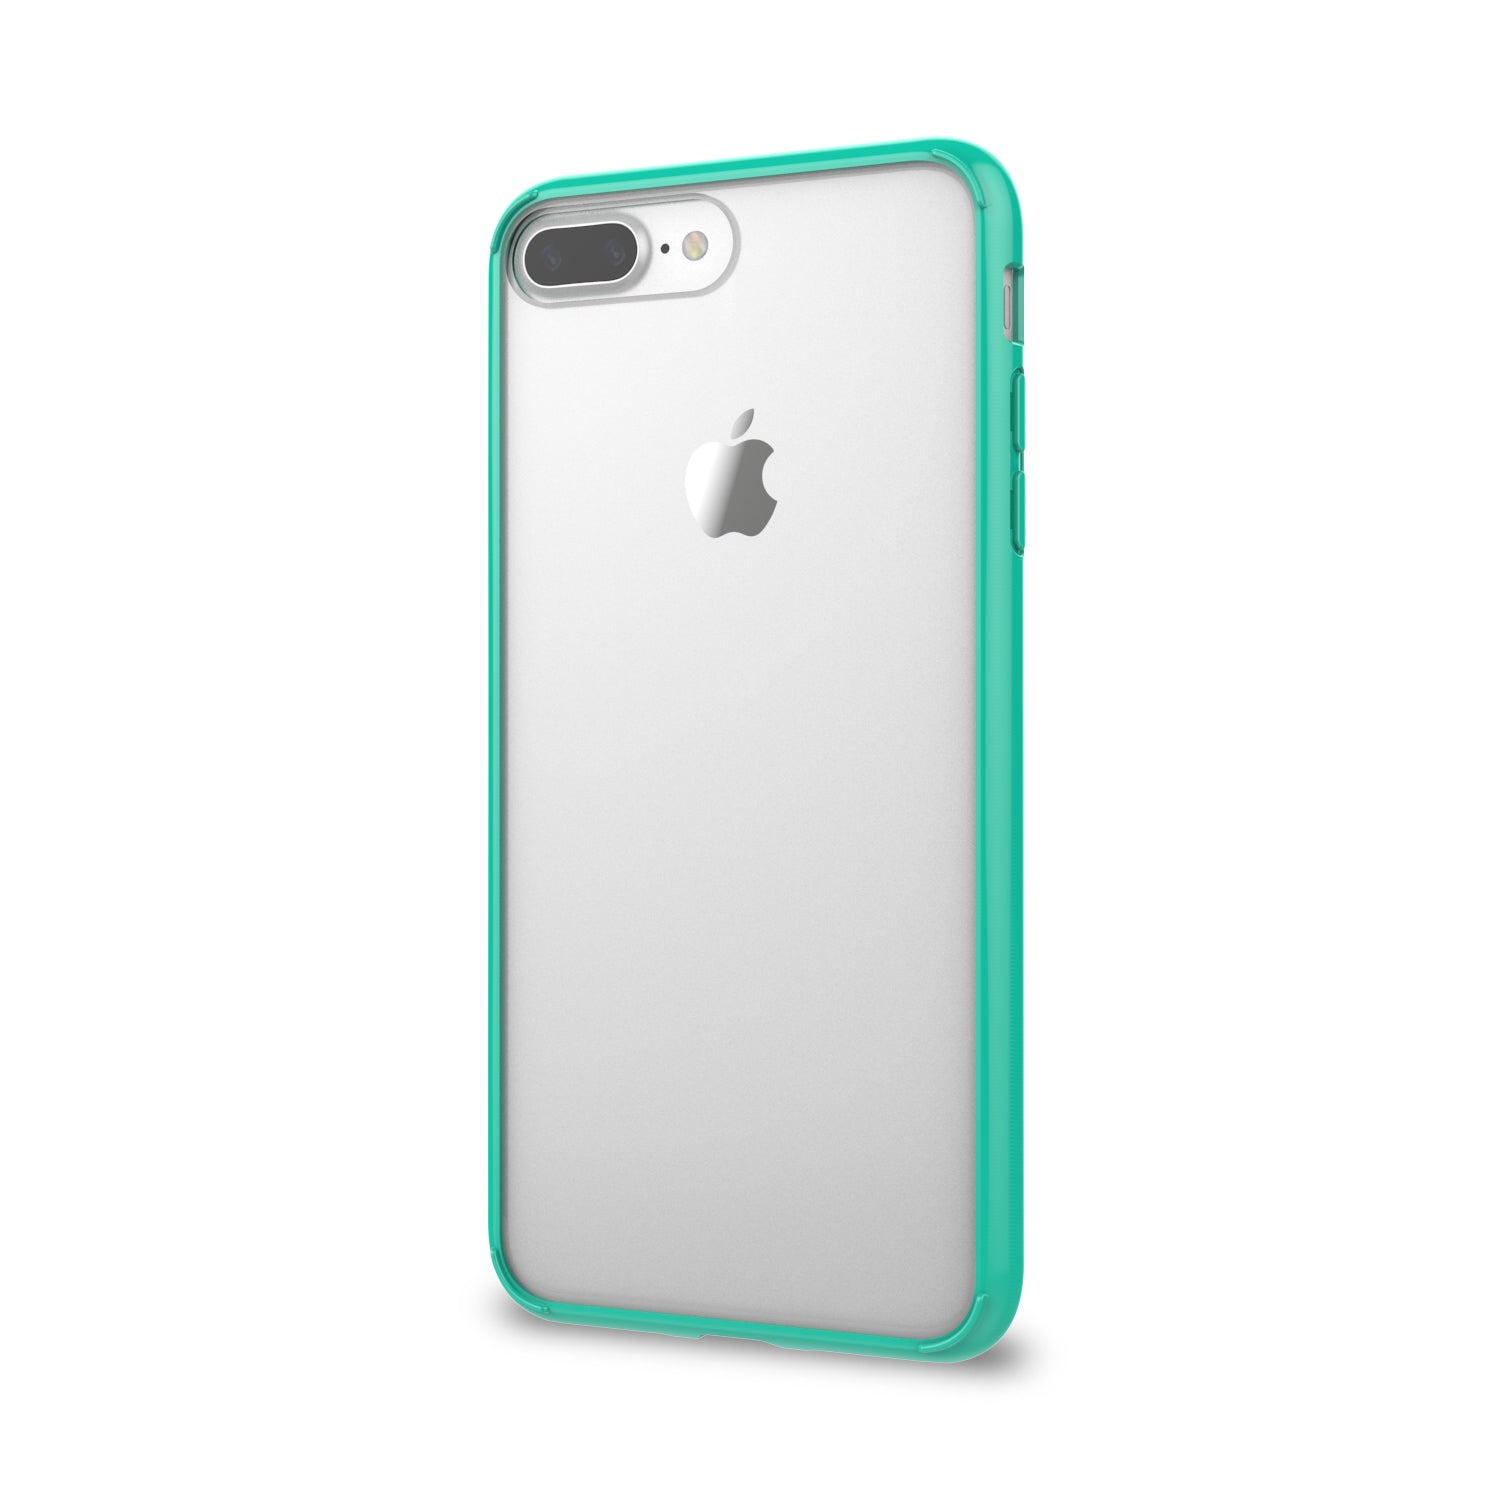 Luvvitt Clear View Hybrid Case for iPhone 7 Plus and 8 Plus - Teal